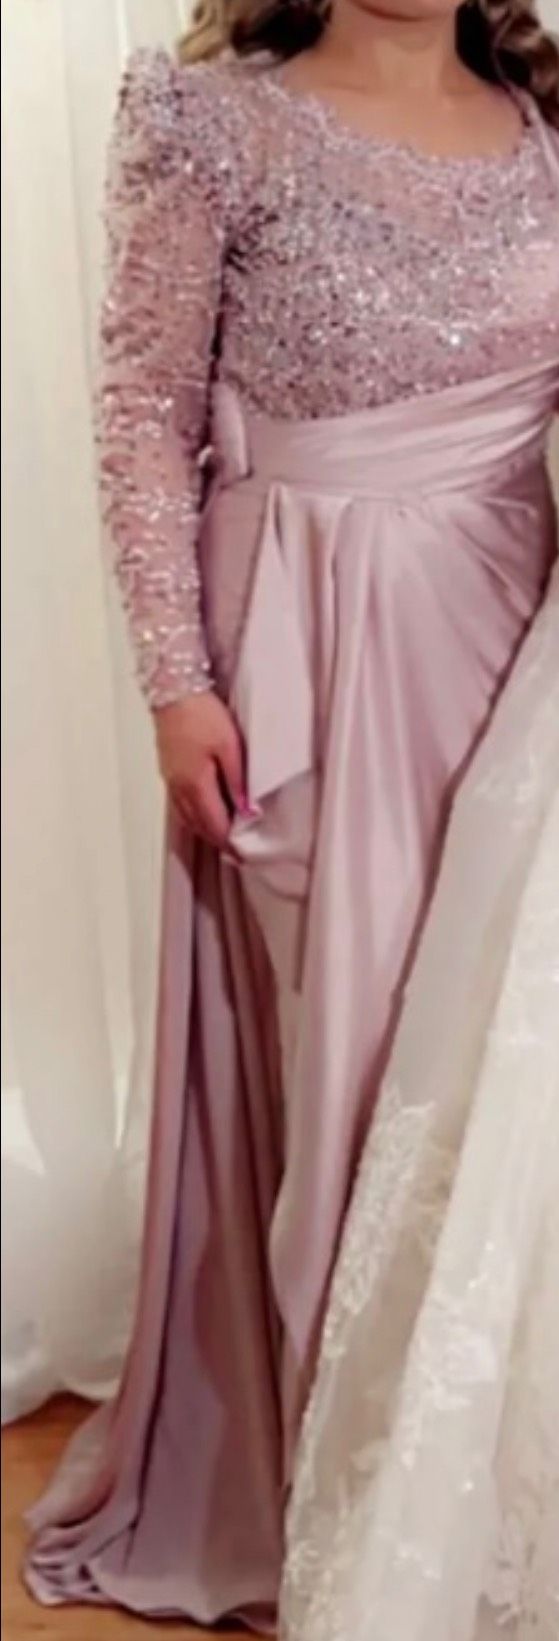 Size 4 Prom Long Sleeve Sequined Light Pink Side Slit Dress on Queenly